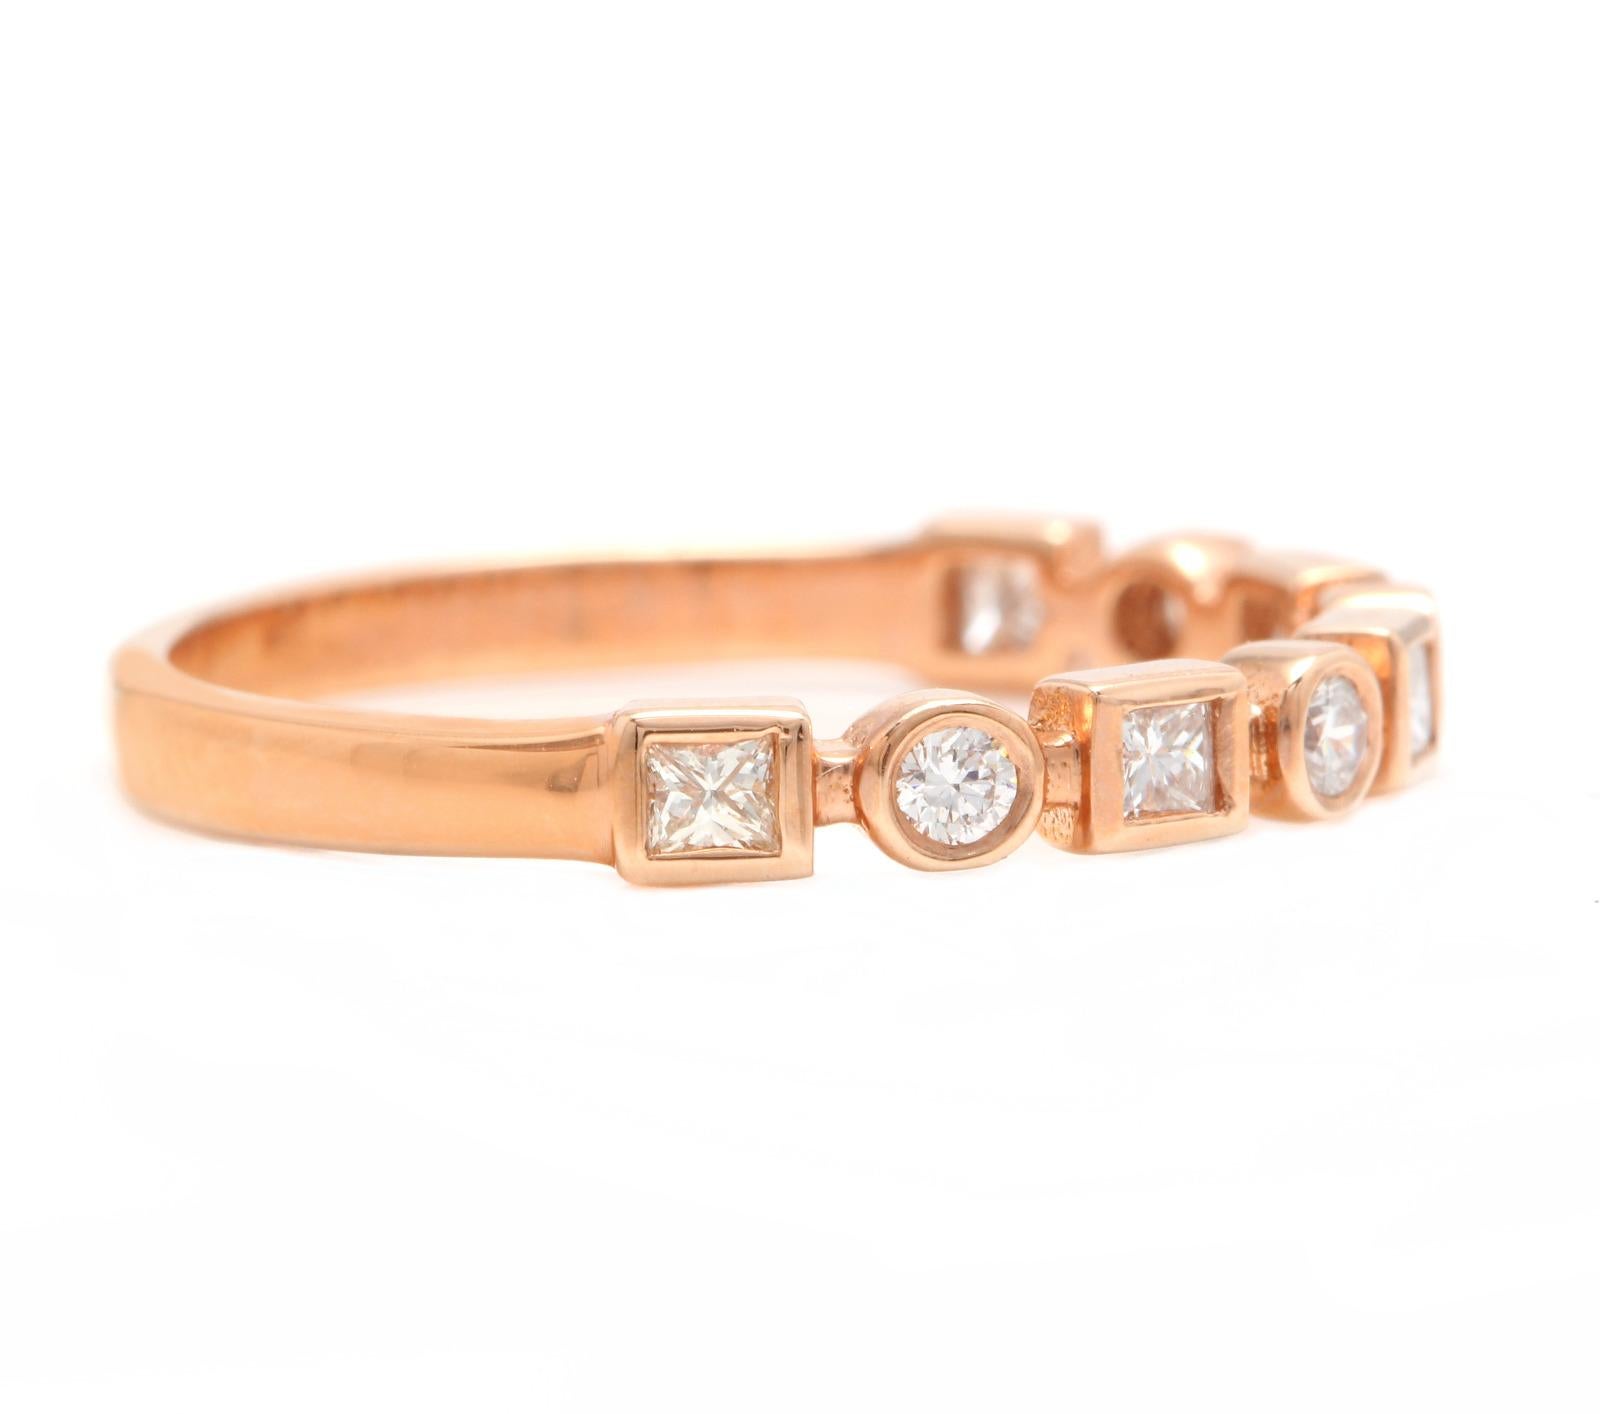 Splendid 0.35 Carats Natural Diamond 14K Solid Rose Gold Ring

Suggested Replacement Value: Approx. $1,800.00

Stamped: 14K

Total Natural Round Cut Diamonds Weight: Approx. 0.35 Carats (color G-H / Clarity SI1-SI2)

The width of the ring is: